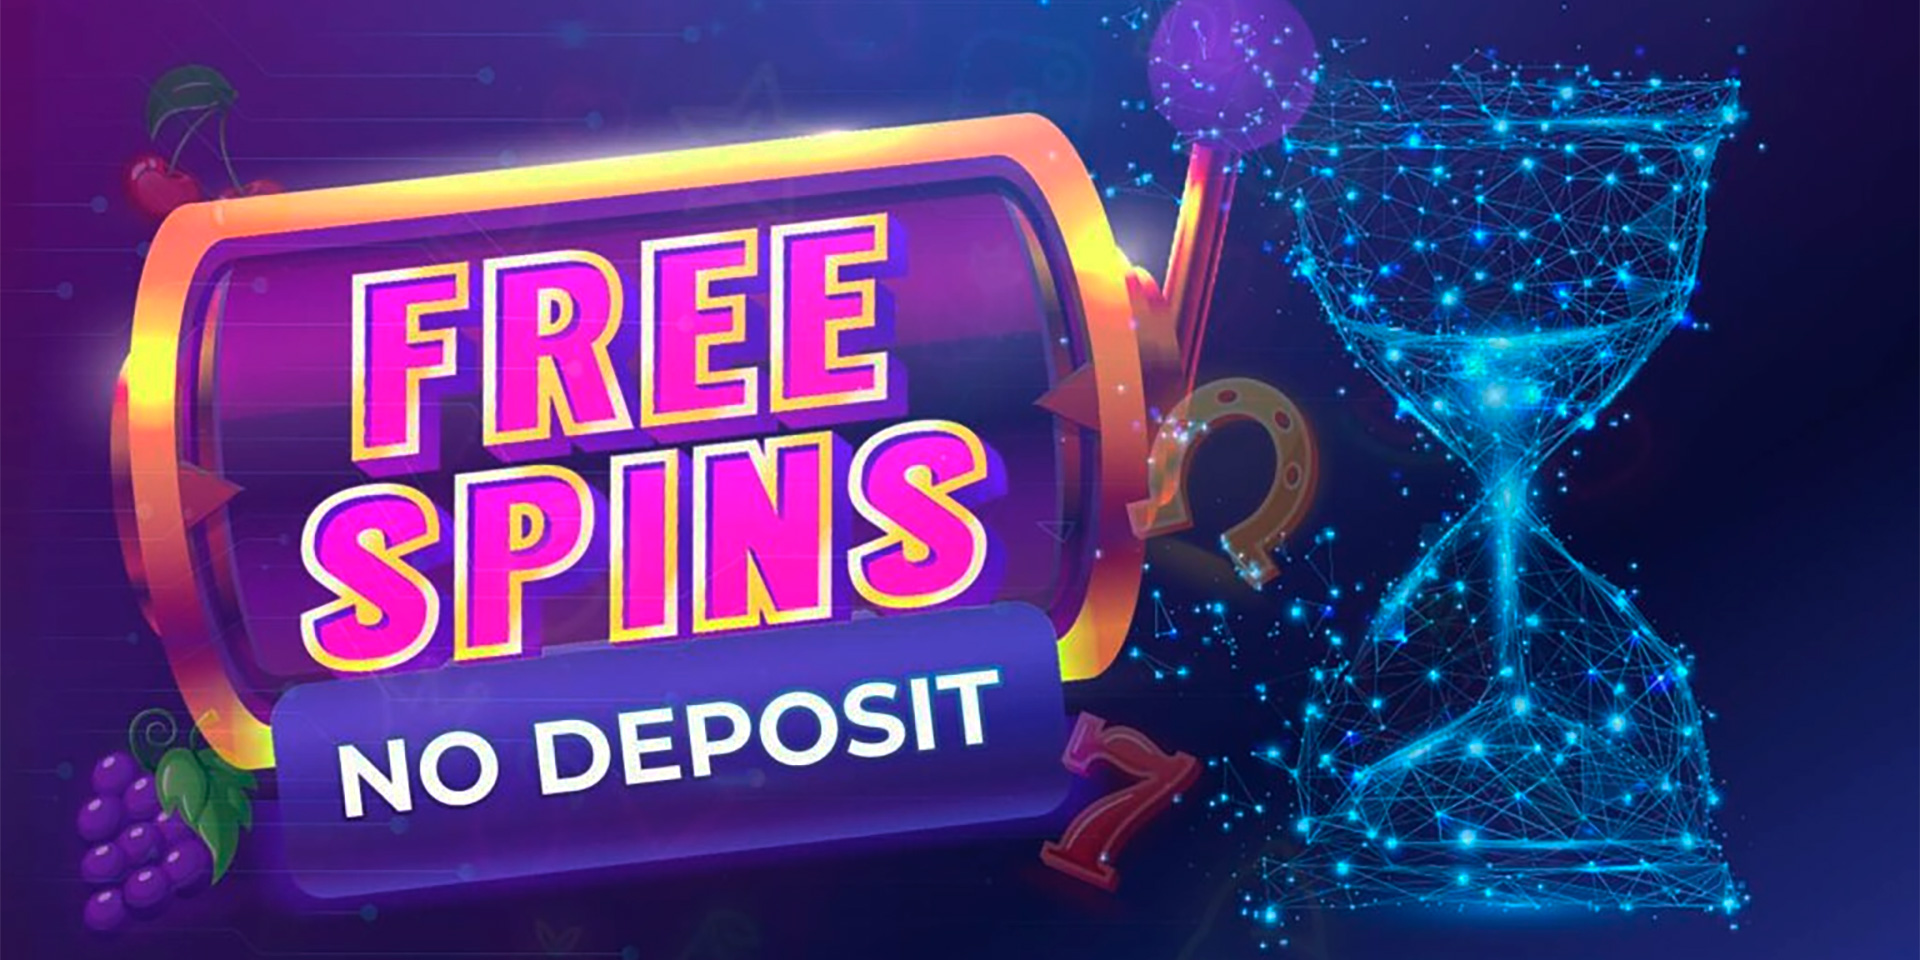 Free Spins Really Free